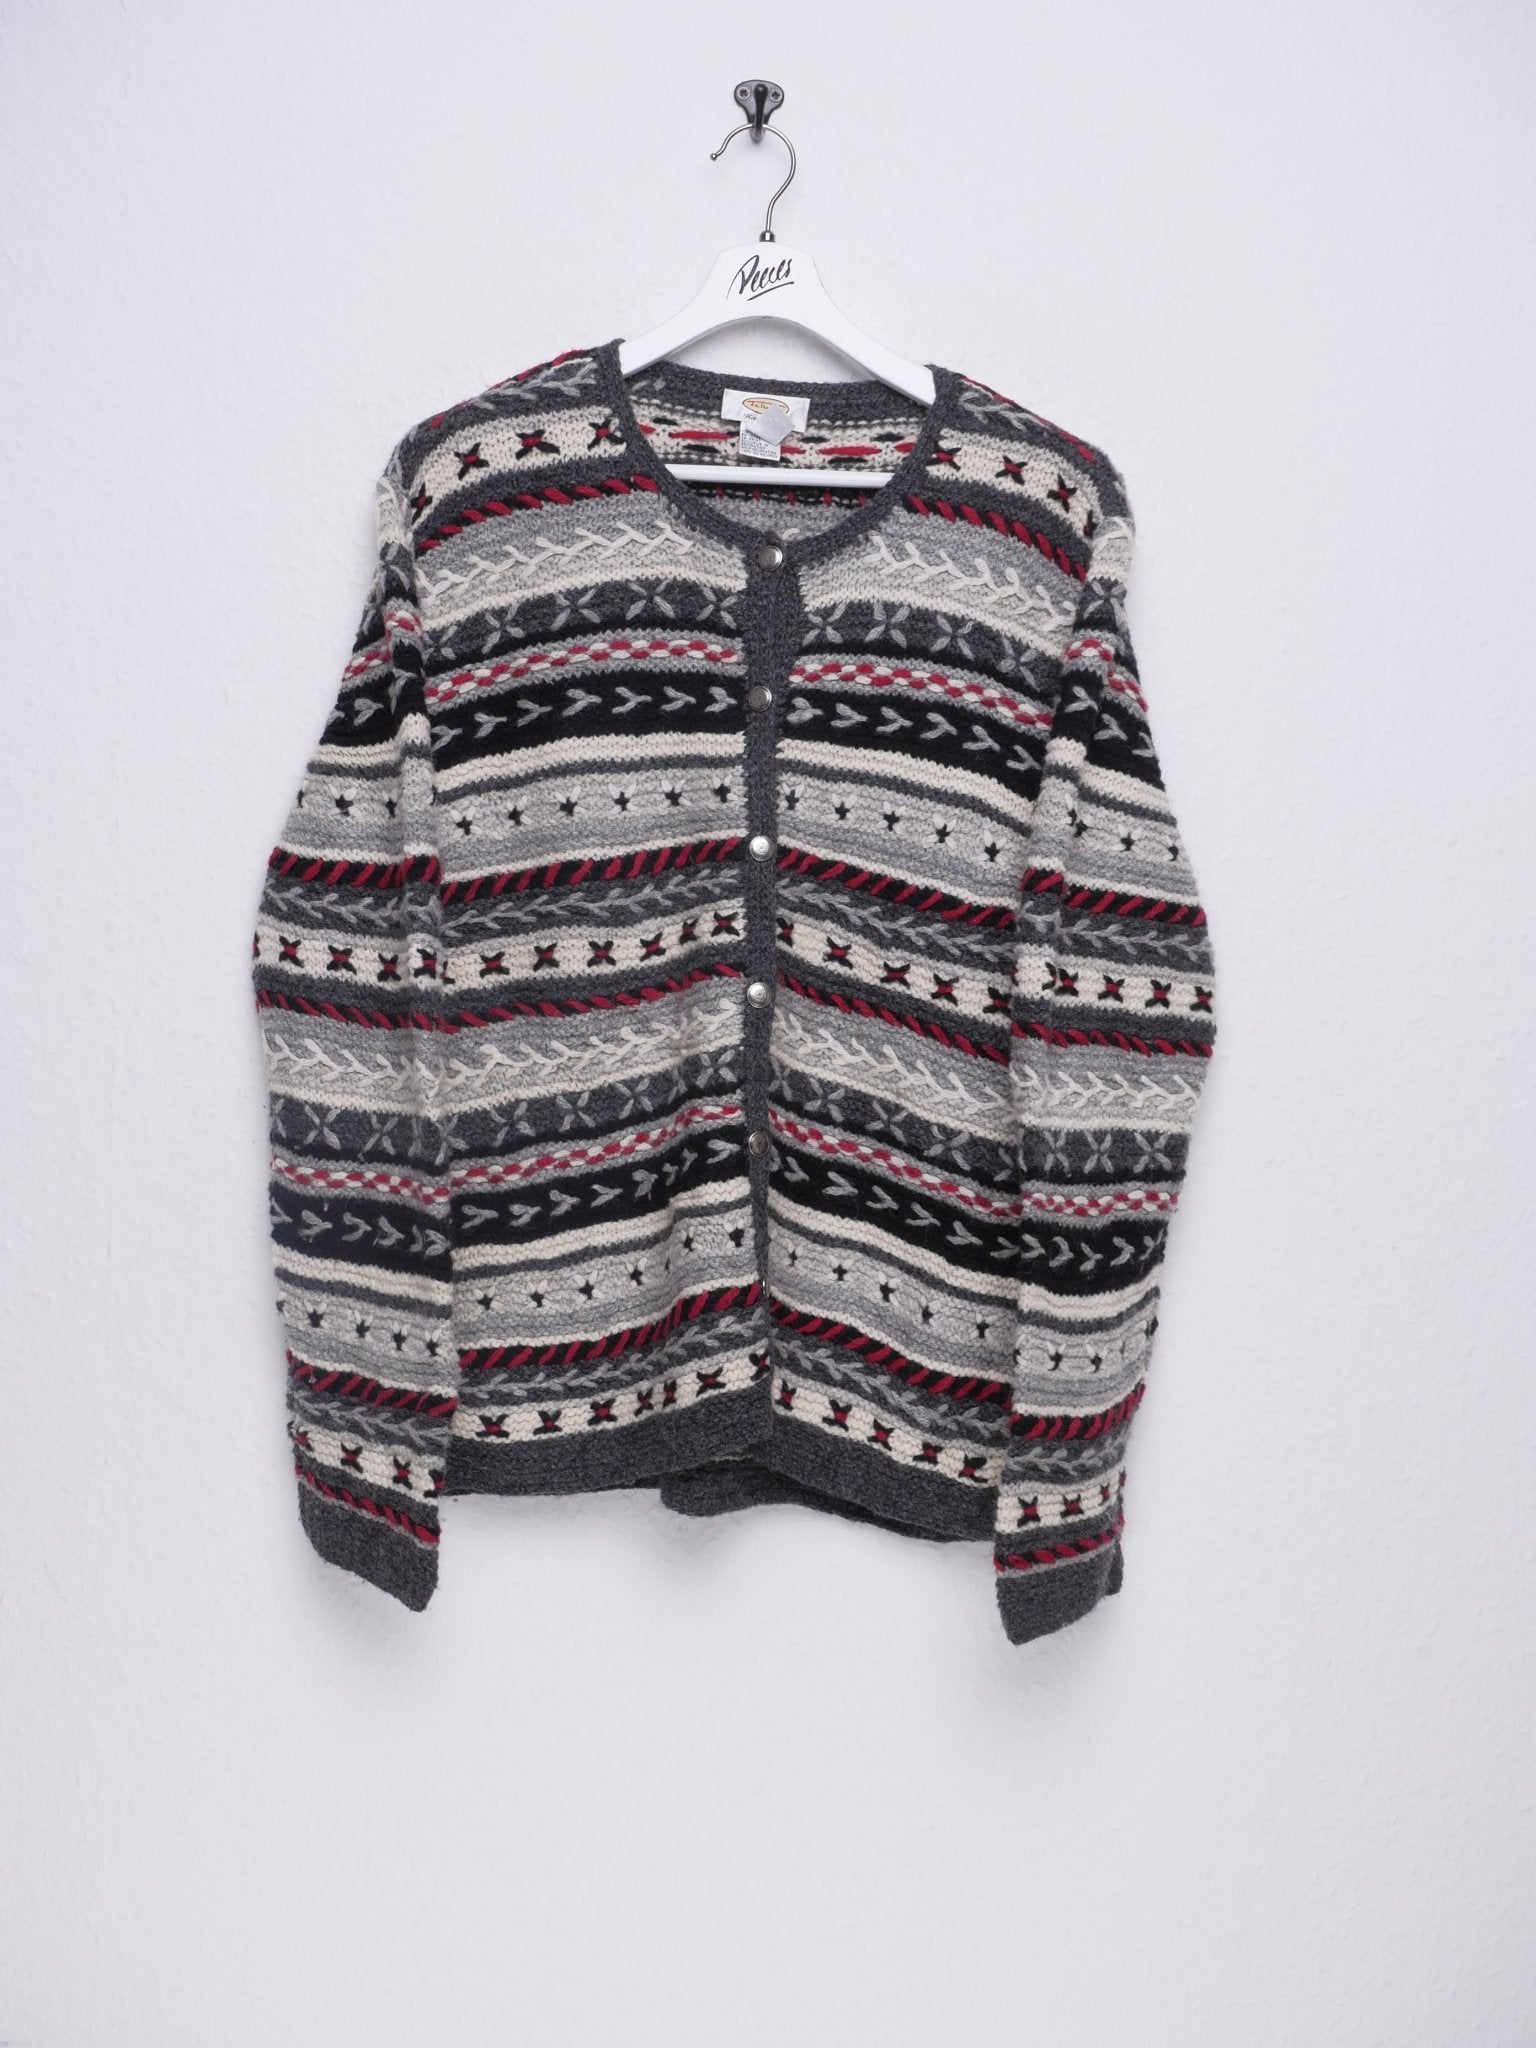 knitted patterned Vintage wool Cardigan Sweater - Peeces